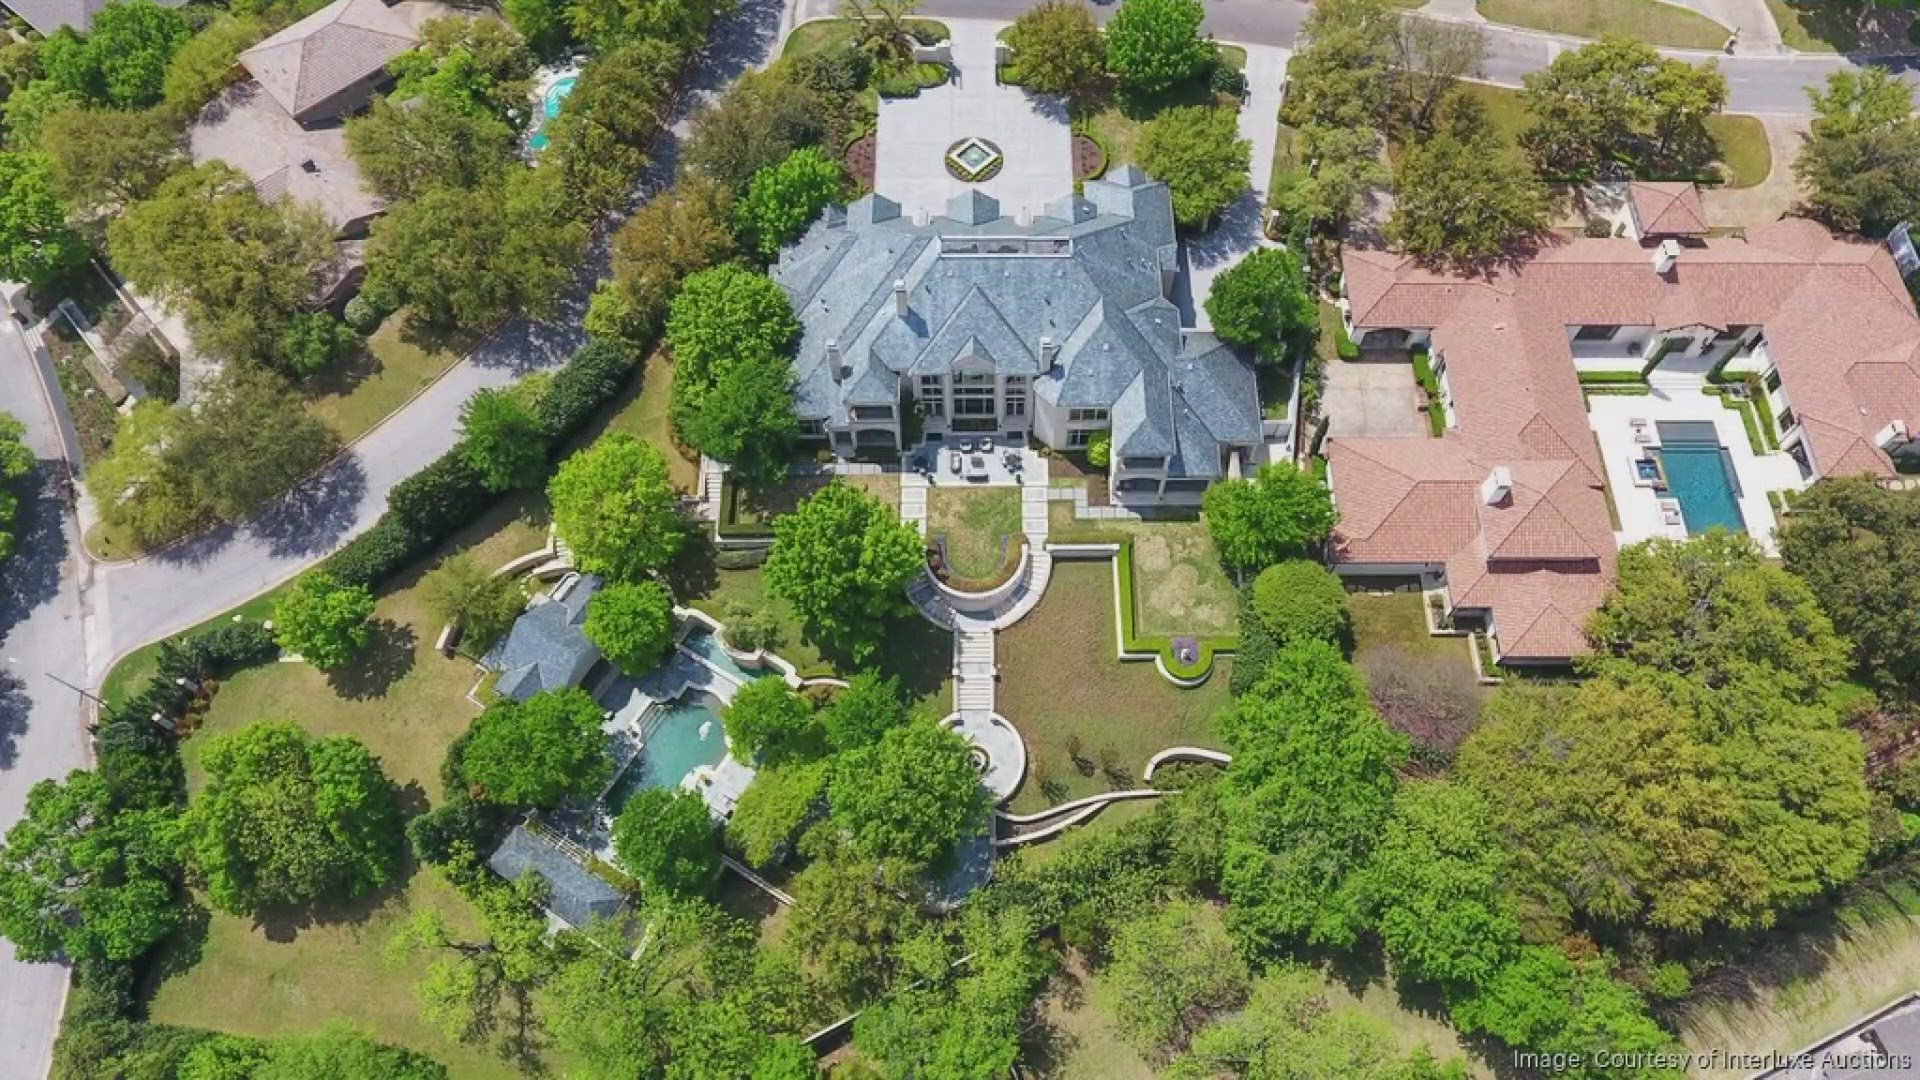 Len Roberts has led several companies, including Arby's, Shoney's, and RadioShack. Now, he's selling his 12,000-square-foot North Texas home.